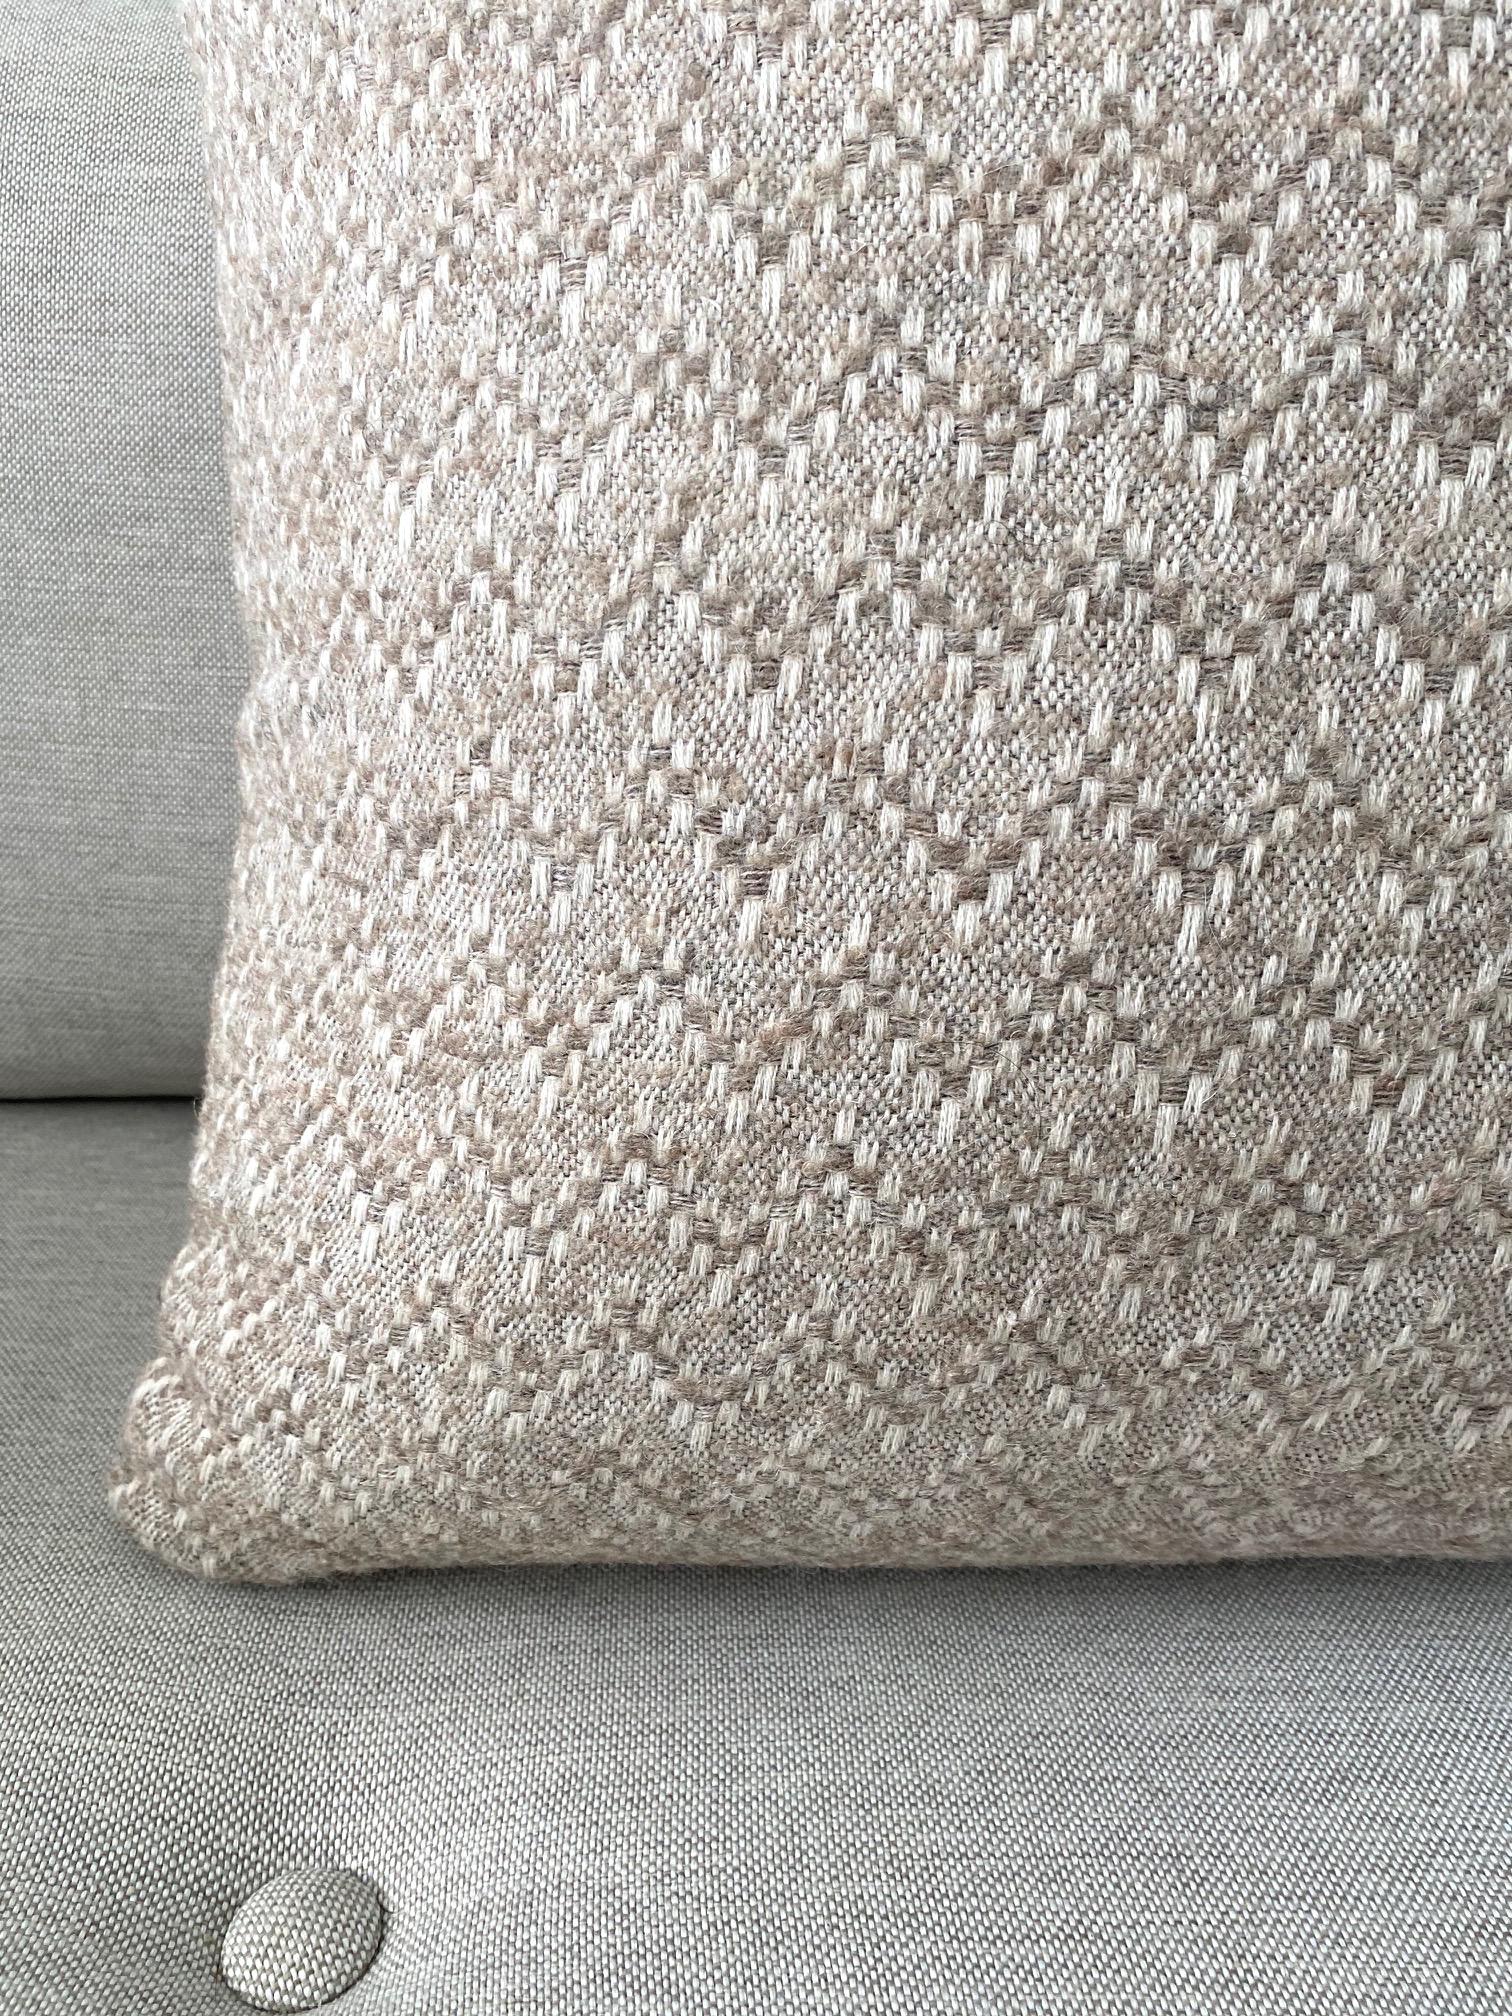 Organic Modern Pierre Frey Organic Wool, Alpaca, and Mohair Chevron Luxe Pillow in Taupe